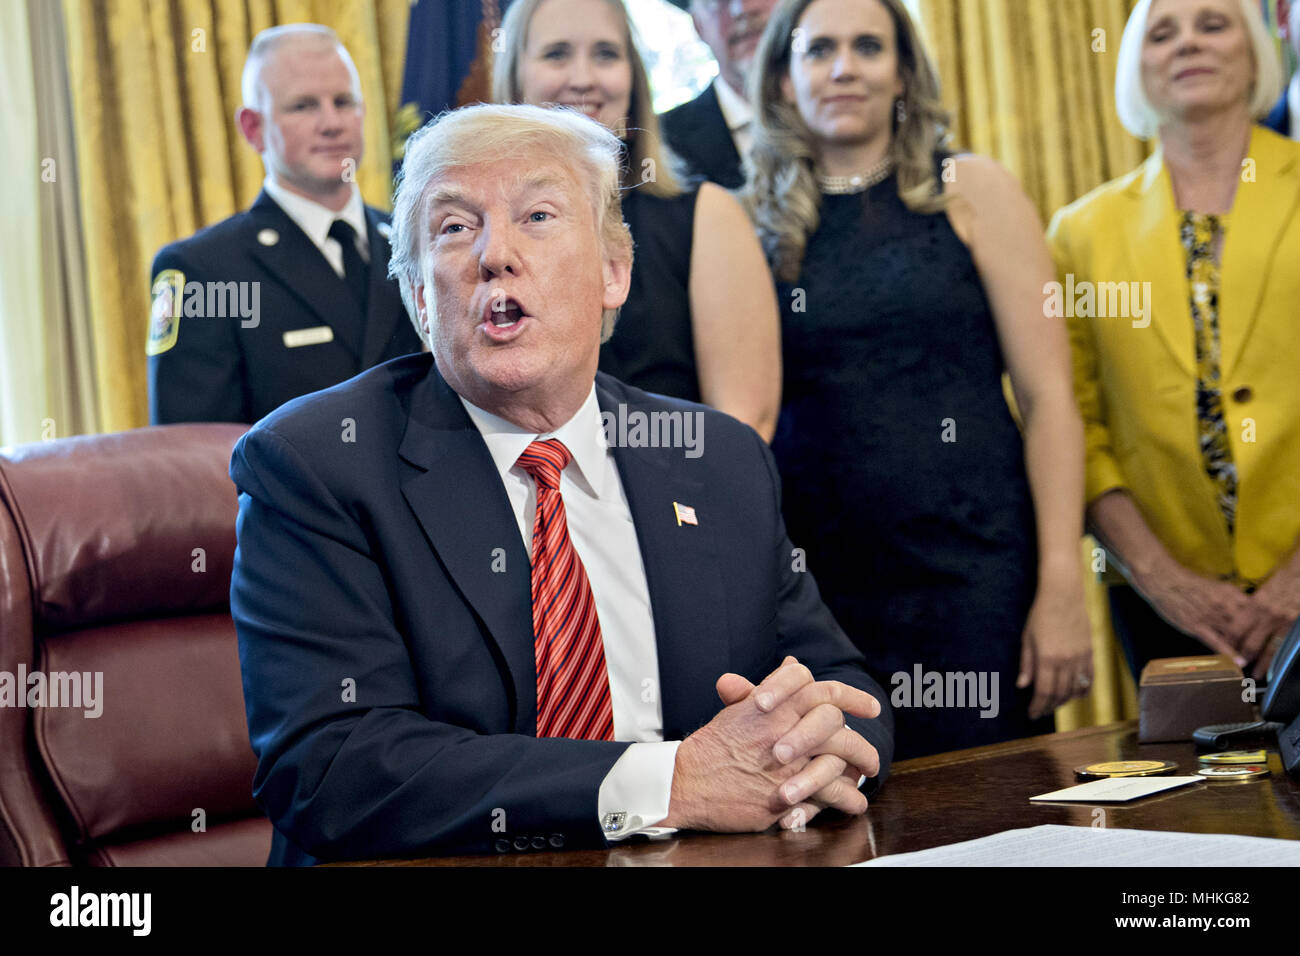 Washington, DC, USA. 1st May, 2018. United States President Donald Trump responds to a question while meeting with the crew and passengers of Southwest Airlines Co. flight 1380 in the Oval Office of the White House in Washington, DC, U.S., on Tuesday, May 1, 2018. An engine on Southwest's flight 1380, a Boeing Co. 737-700 bound for Dallas from New York's LaGuardia airport, exploded and made an emergency landing on April 17 sending shrapnel into the plane and killing a passenger seated near a window. Credit: Andrew Harrer/Pool via CNP | usage worldwide Credit: dpa/Alamy Live News Stock Photo